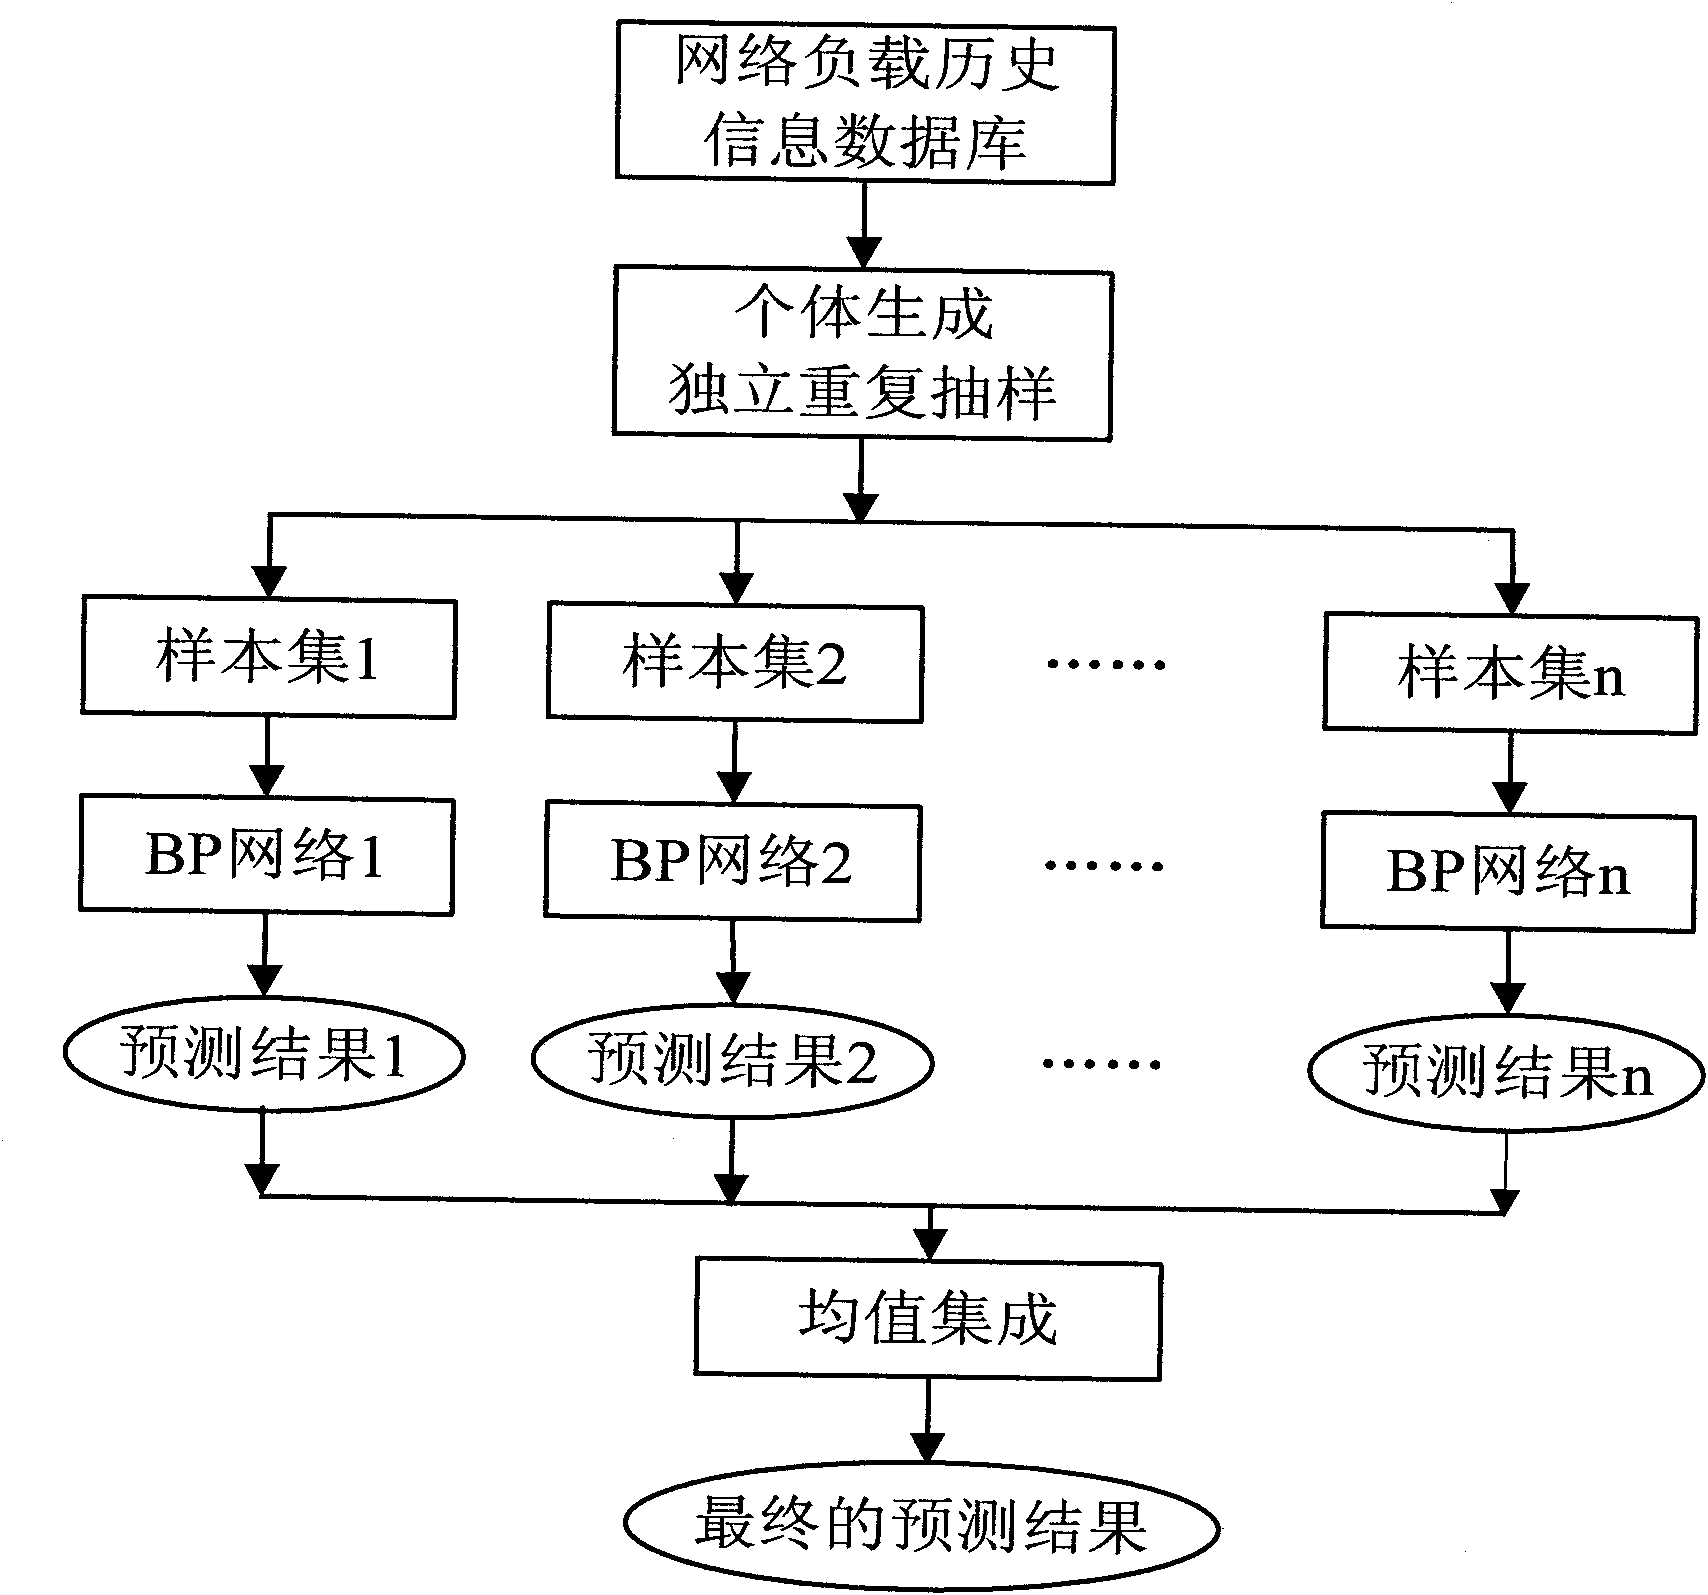 Access network selection method based on neural network and fuzzy logic